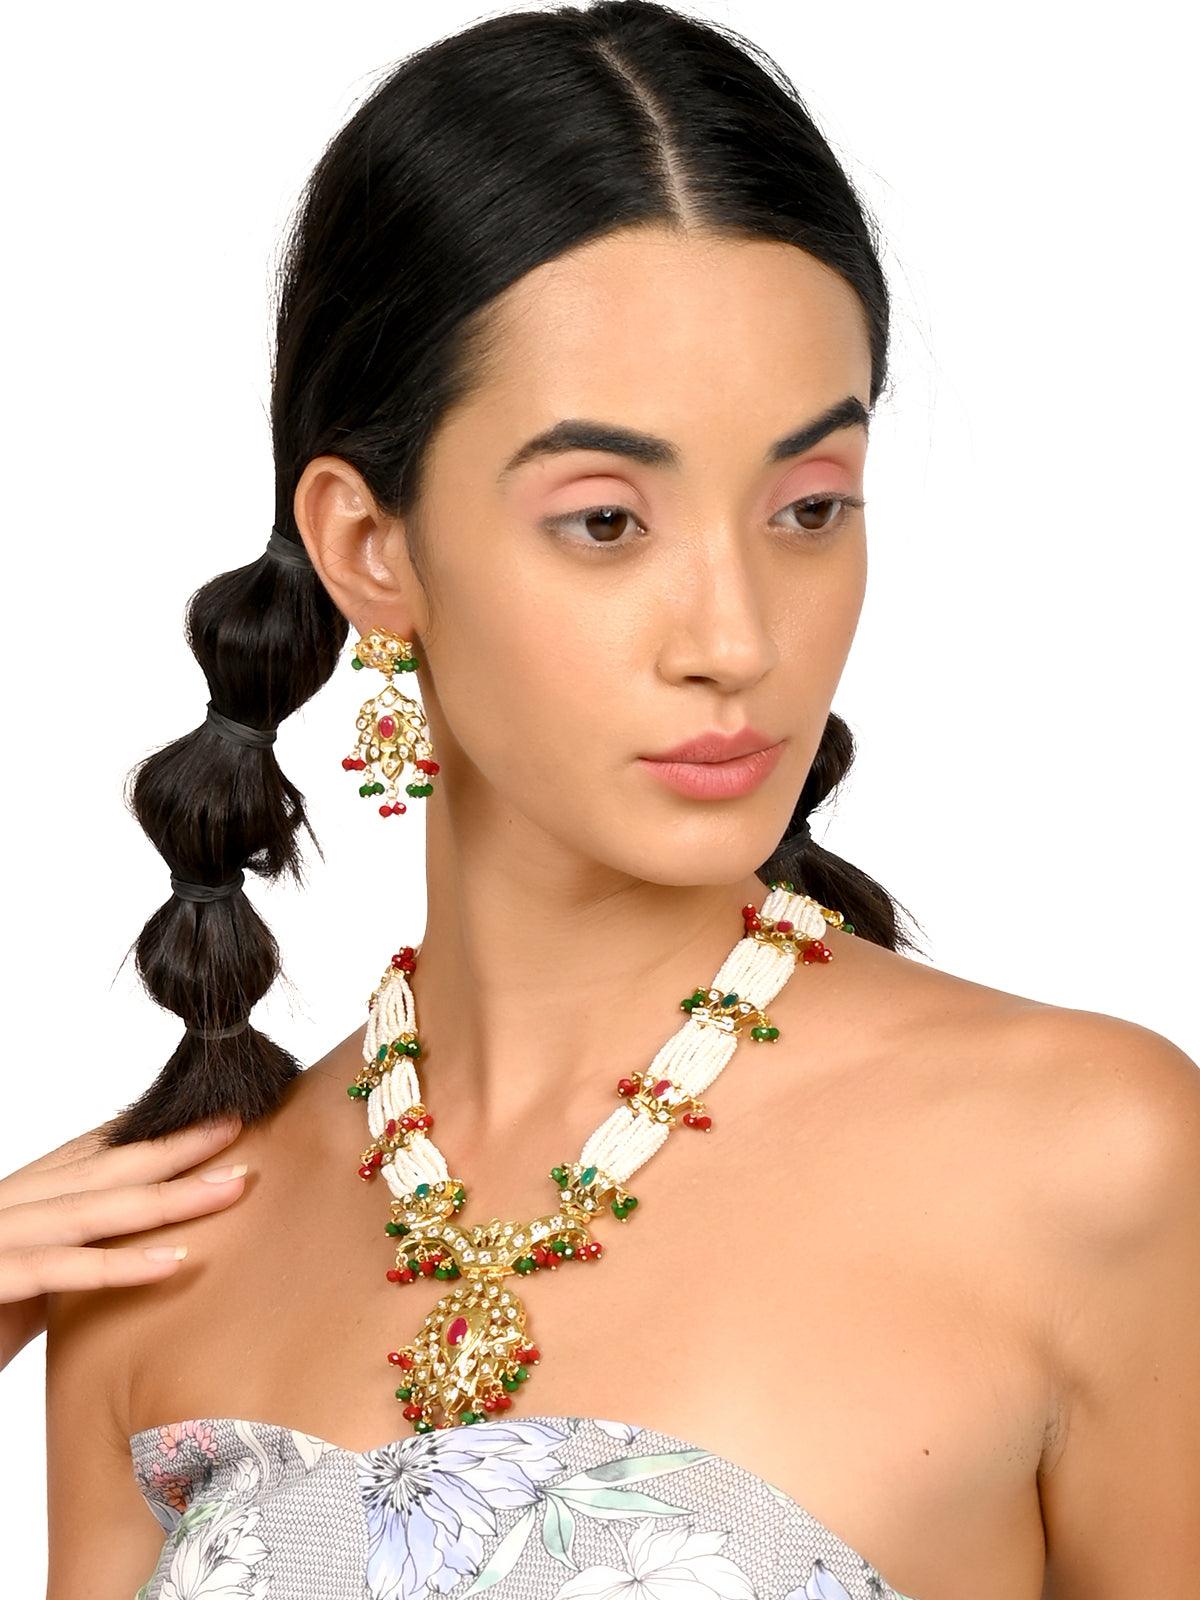 Women's Red And Green Stunning Beaded Necklace Set - Odette